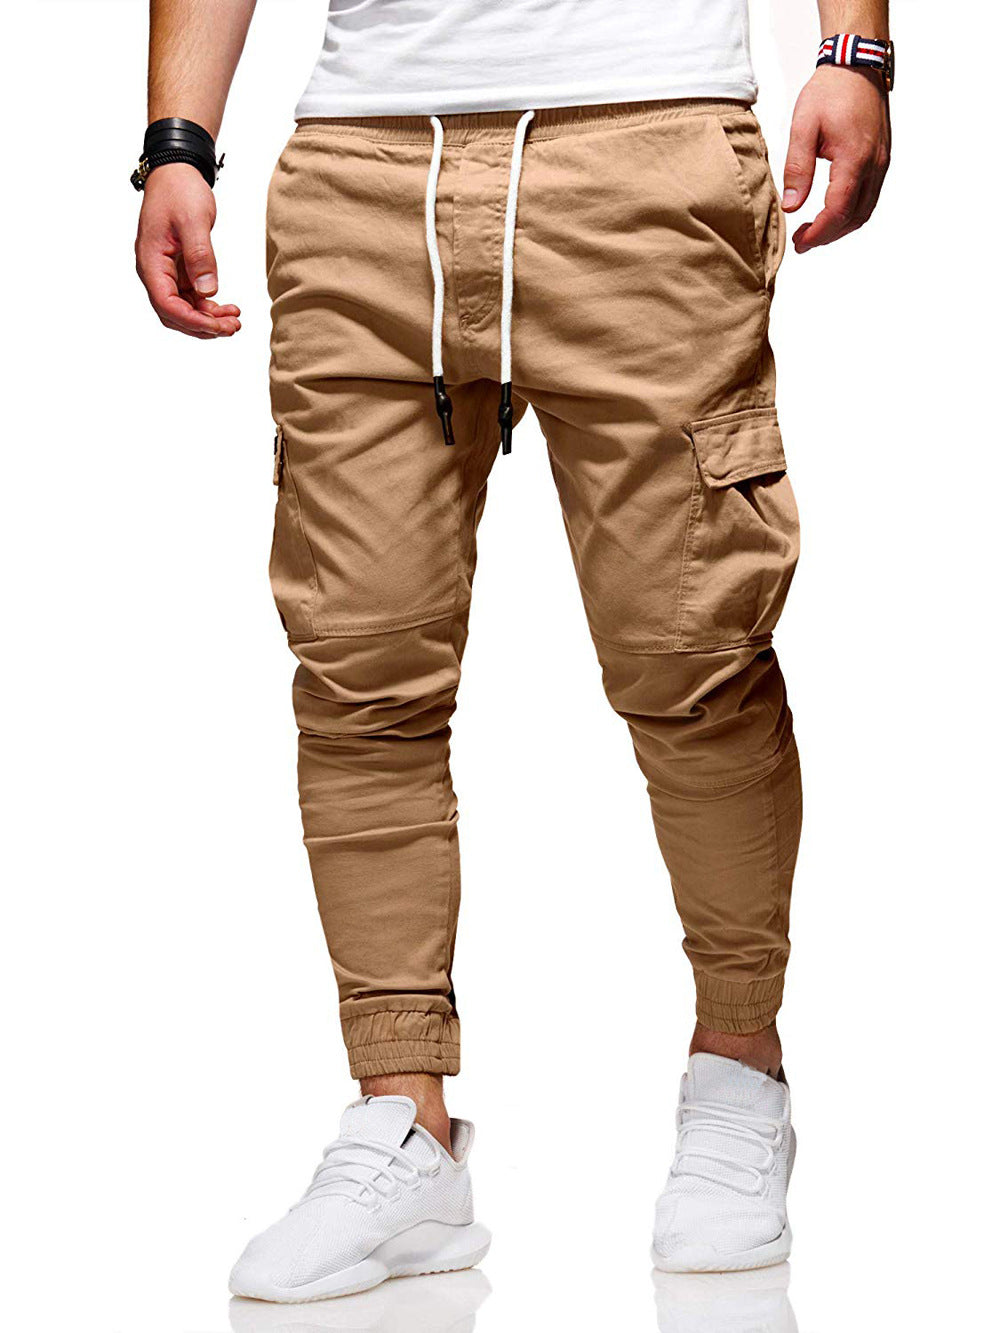 Men's Sports Fitness Pant Workout Jogger New Arrival